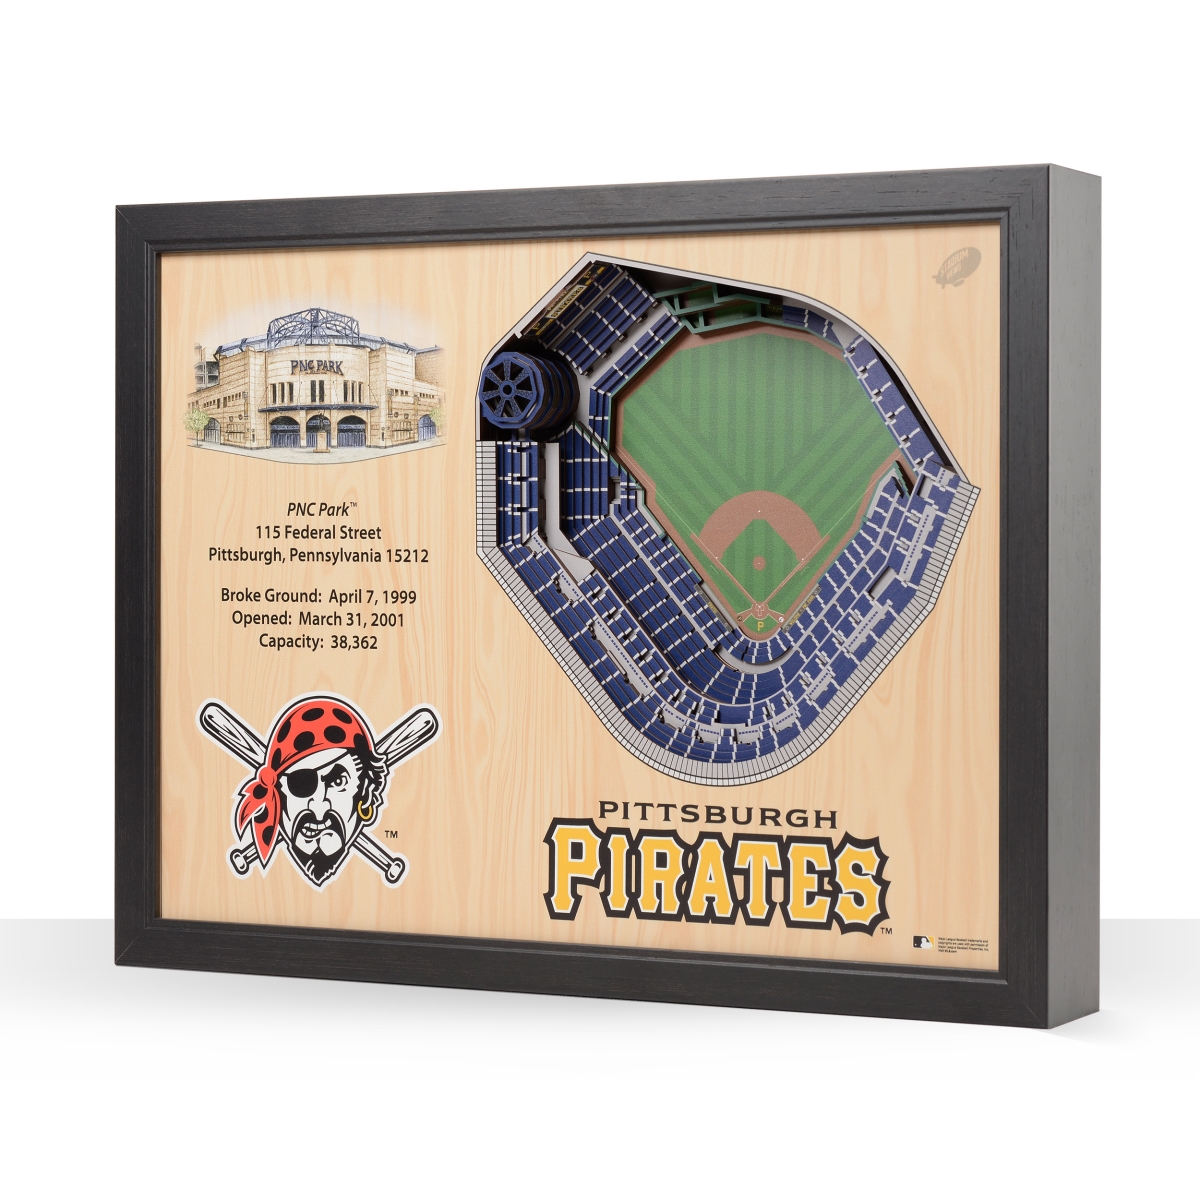 Online Shopping for Housewares, Baby Gear, Health & more. YouTheFan 9025191  22.25 x 22 x 23 in. MLB Pittsburgh Pirates 25-Layer StadiumViews 3D Wall  Art - PNC Park